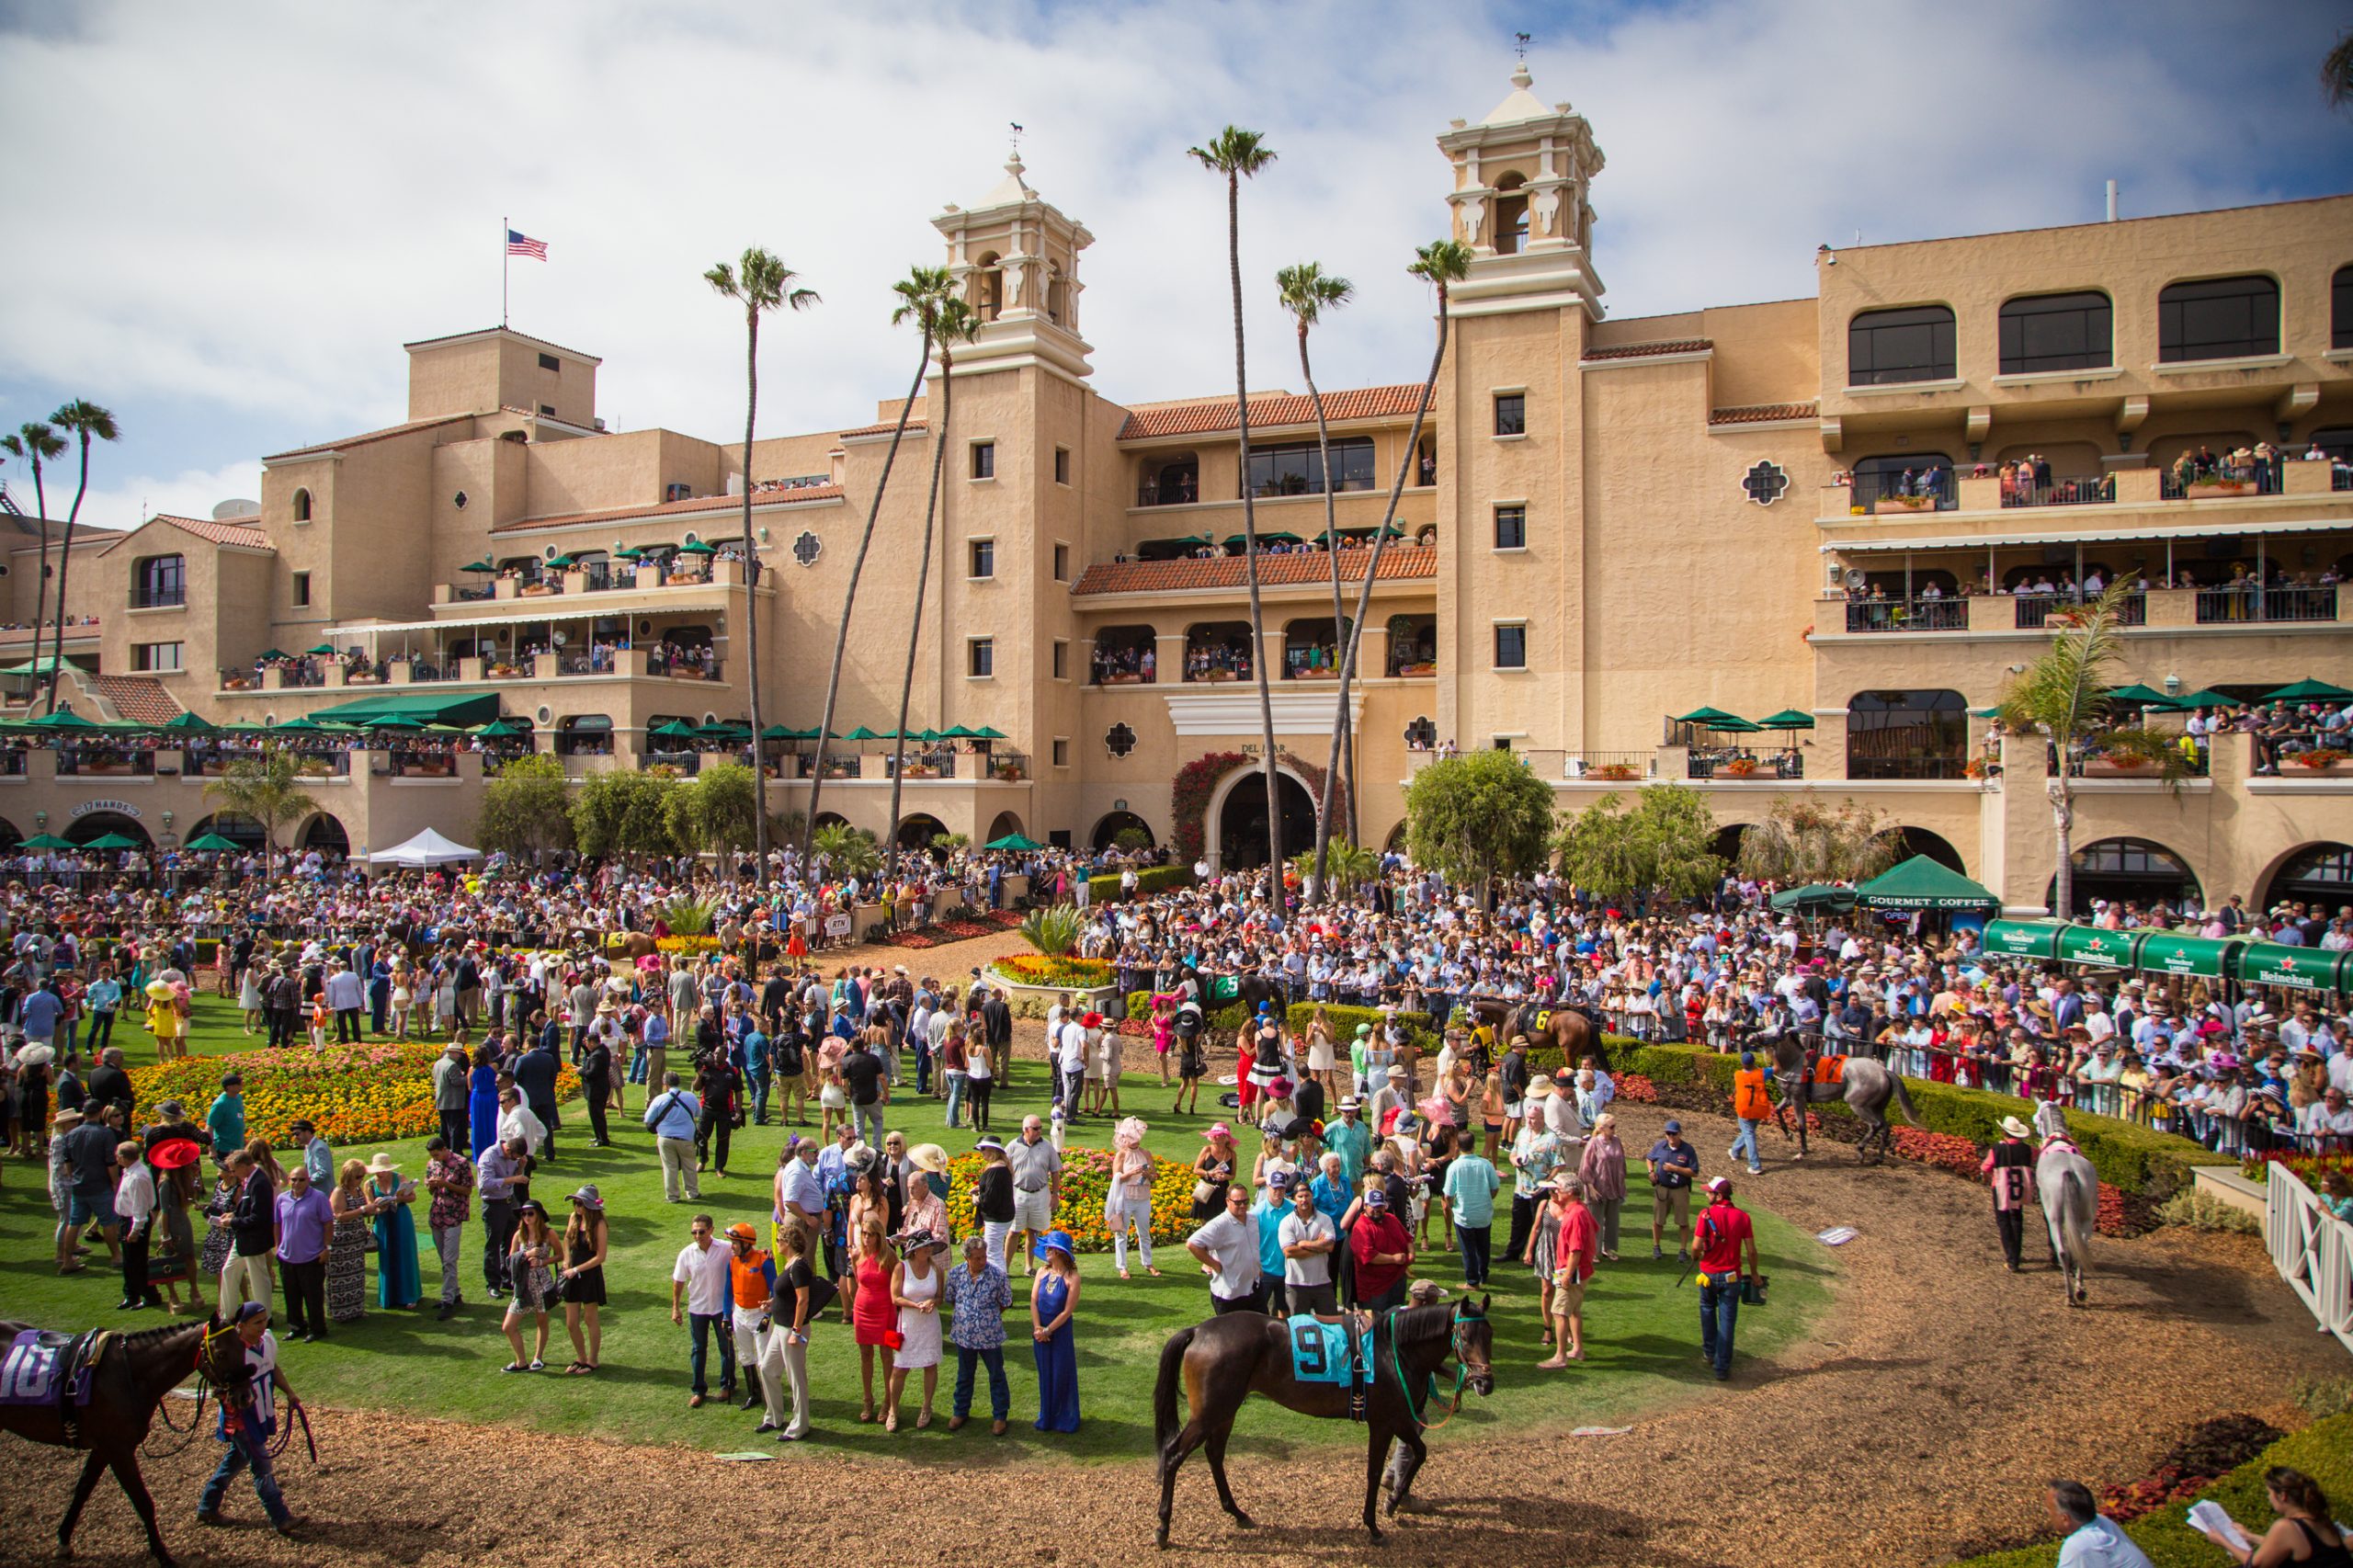 Catch thoroughbred racing at the Del Mar racetrack. 